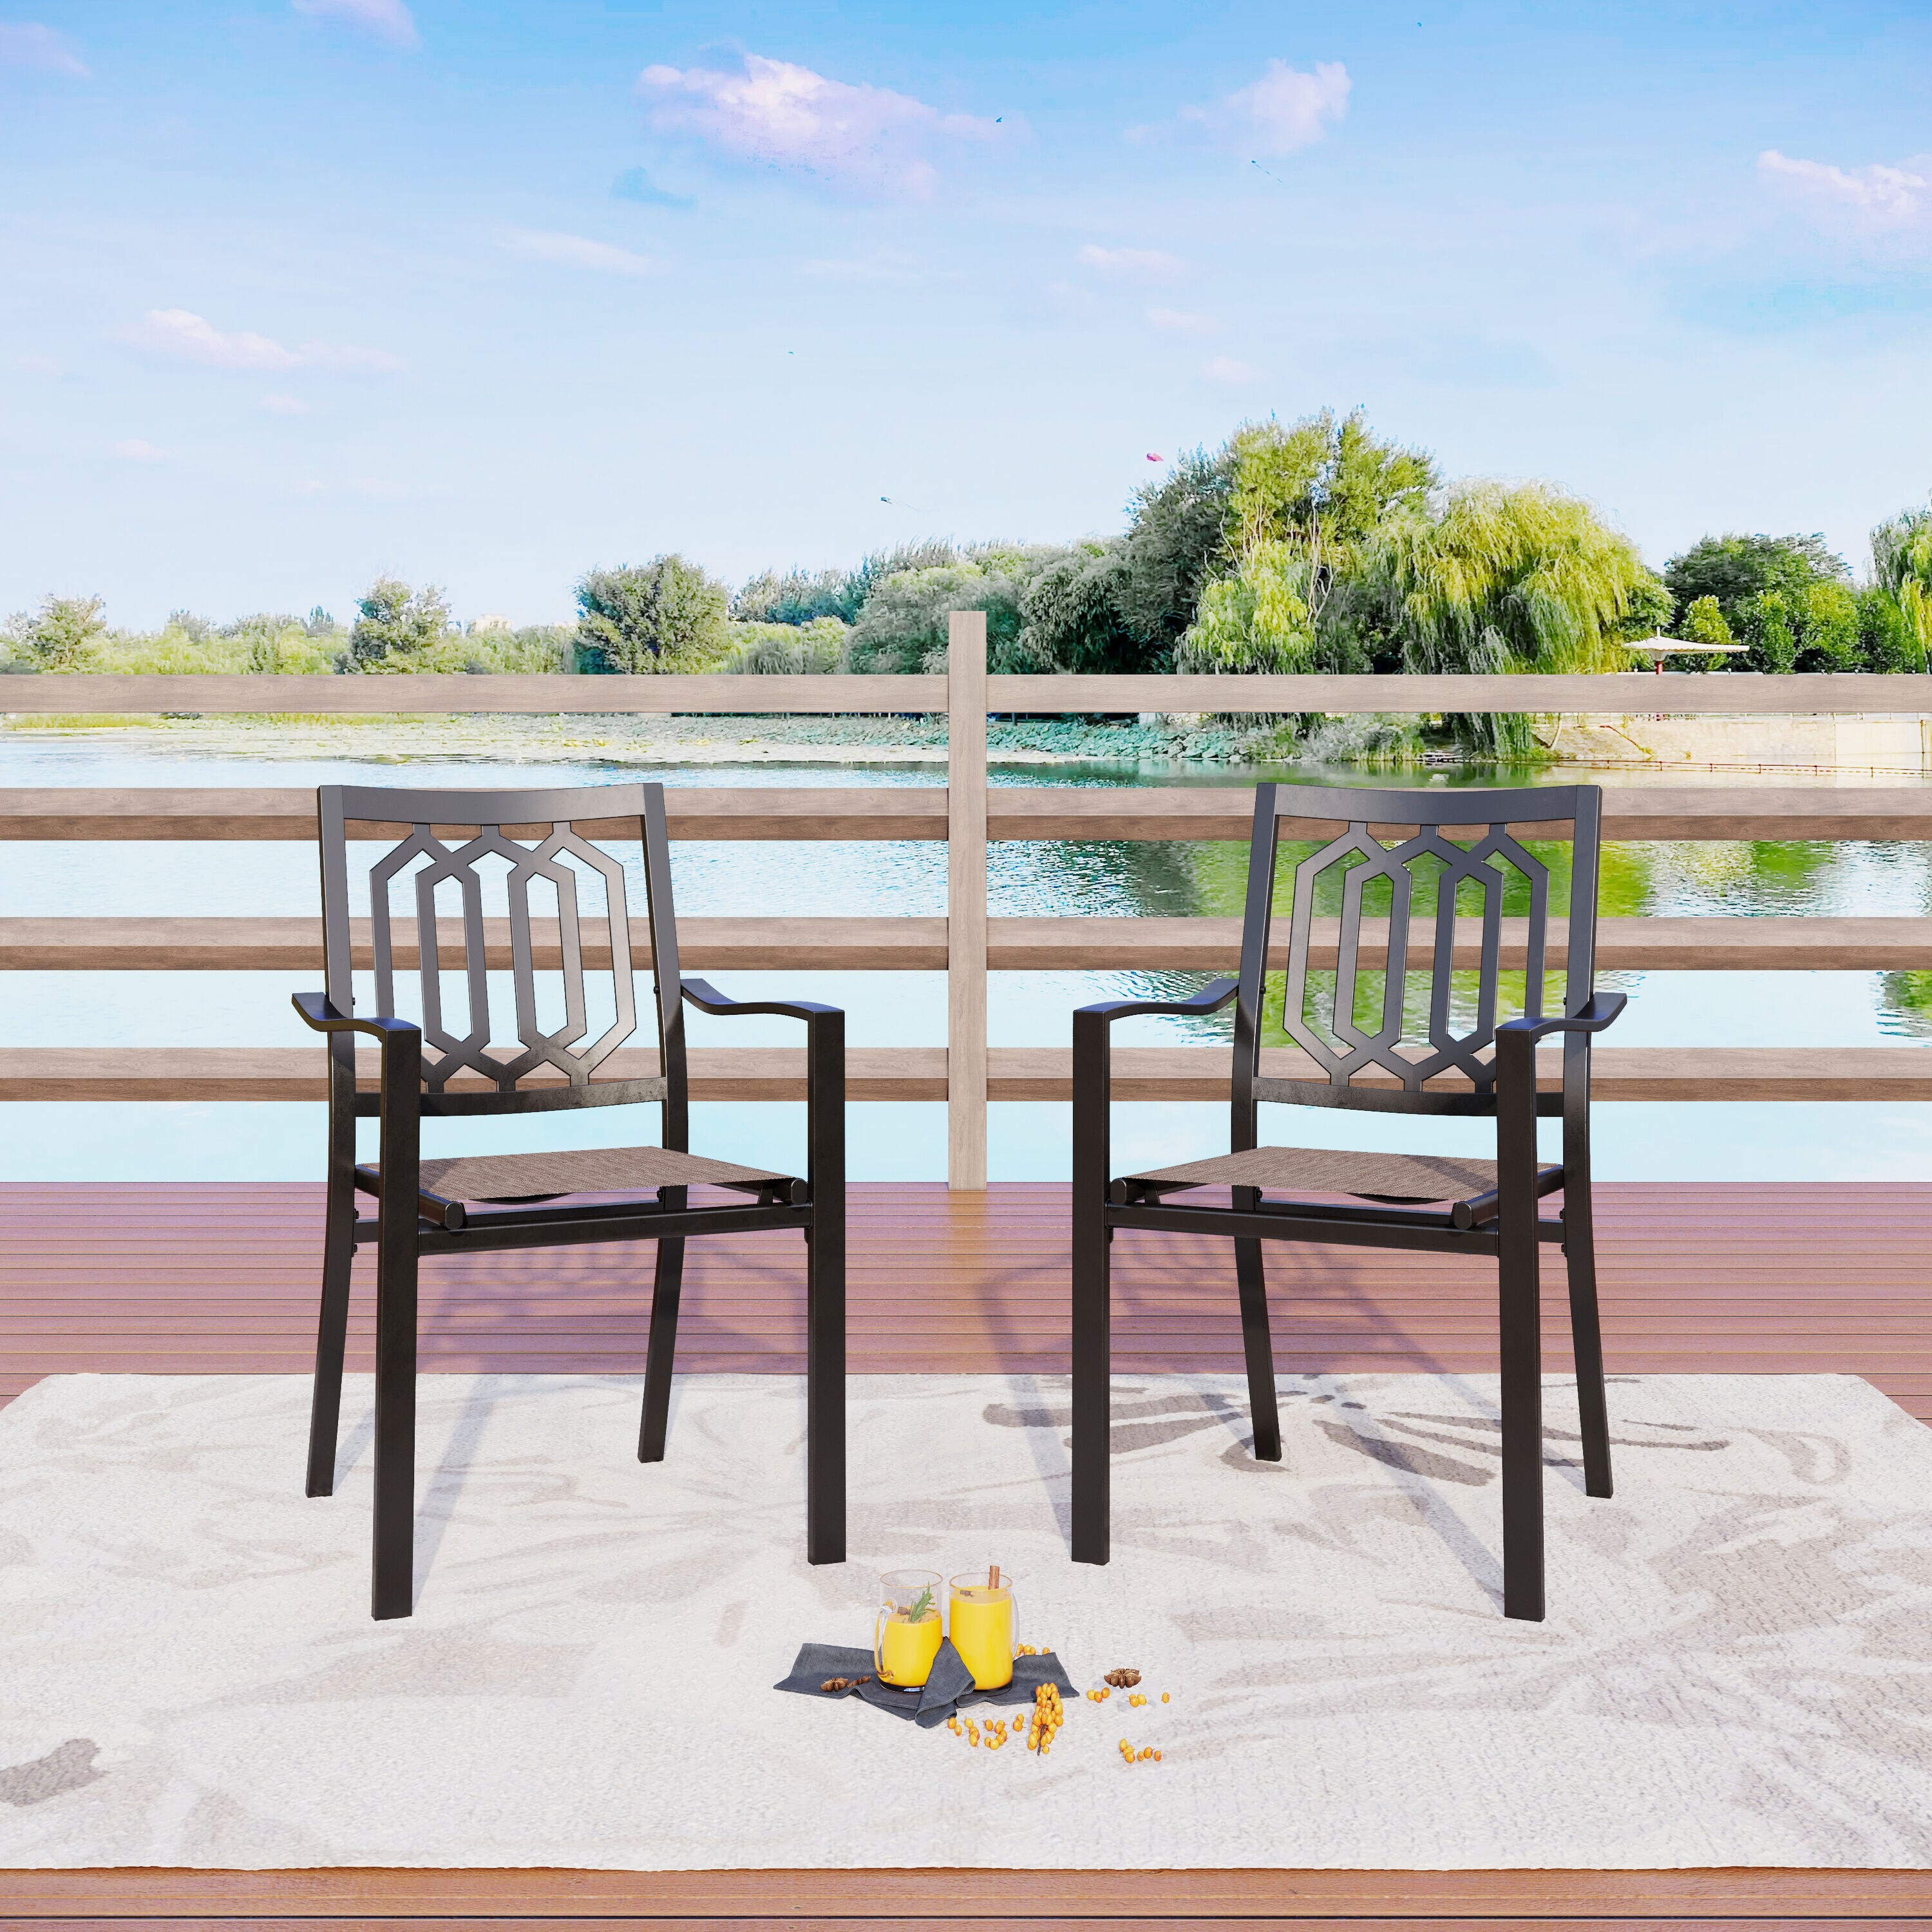 Patio Premier 16 in. L x 15 in. W x 2.5 H Square Outdoor Dining Chair Seat Cushion (2-Pack)